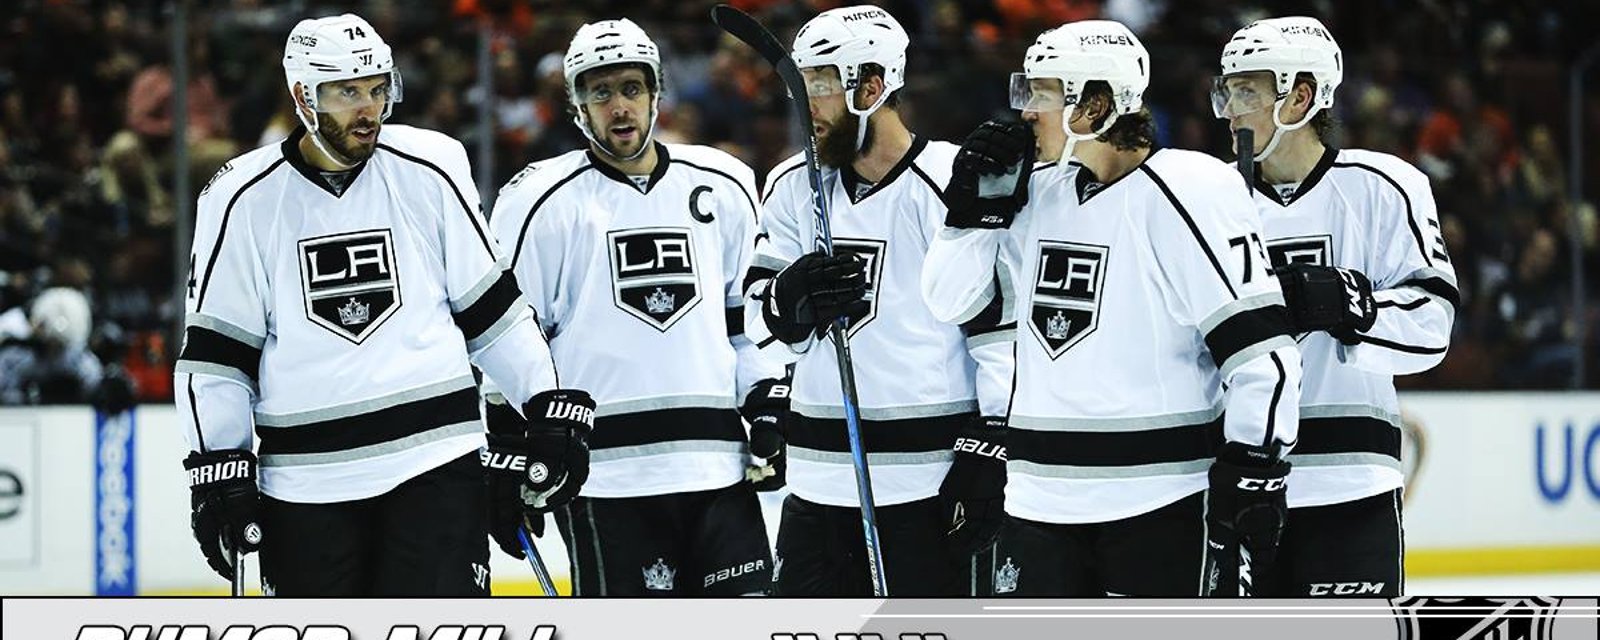 Rumor: L.A. Kings search for a new coach “includes just 1 man.”